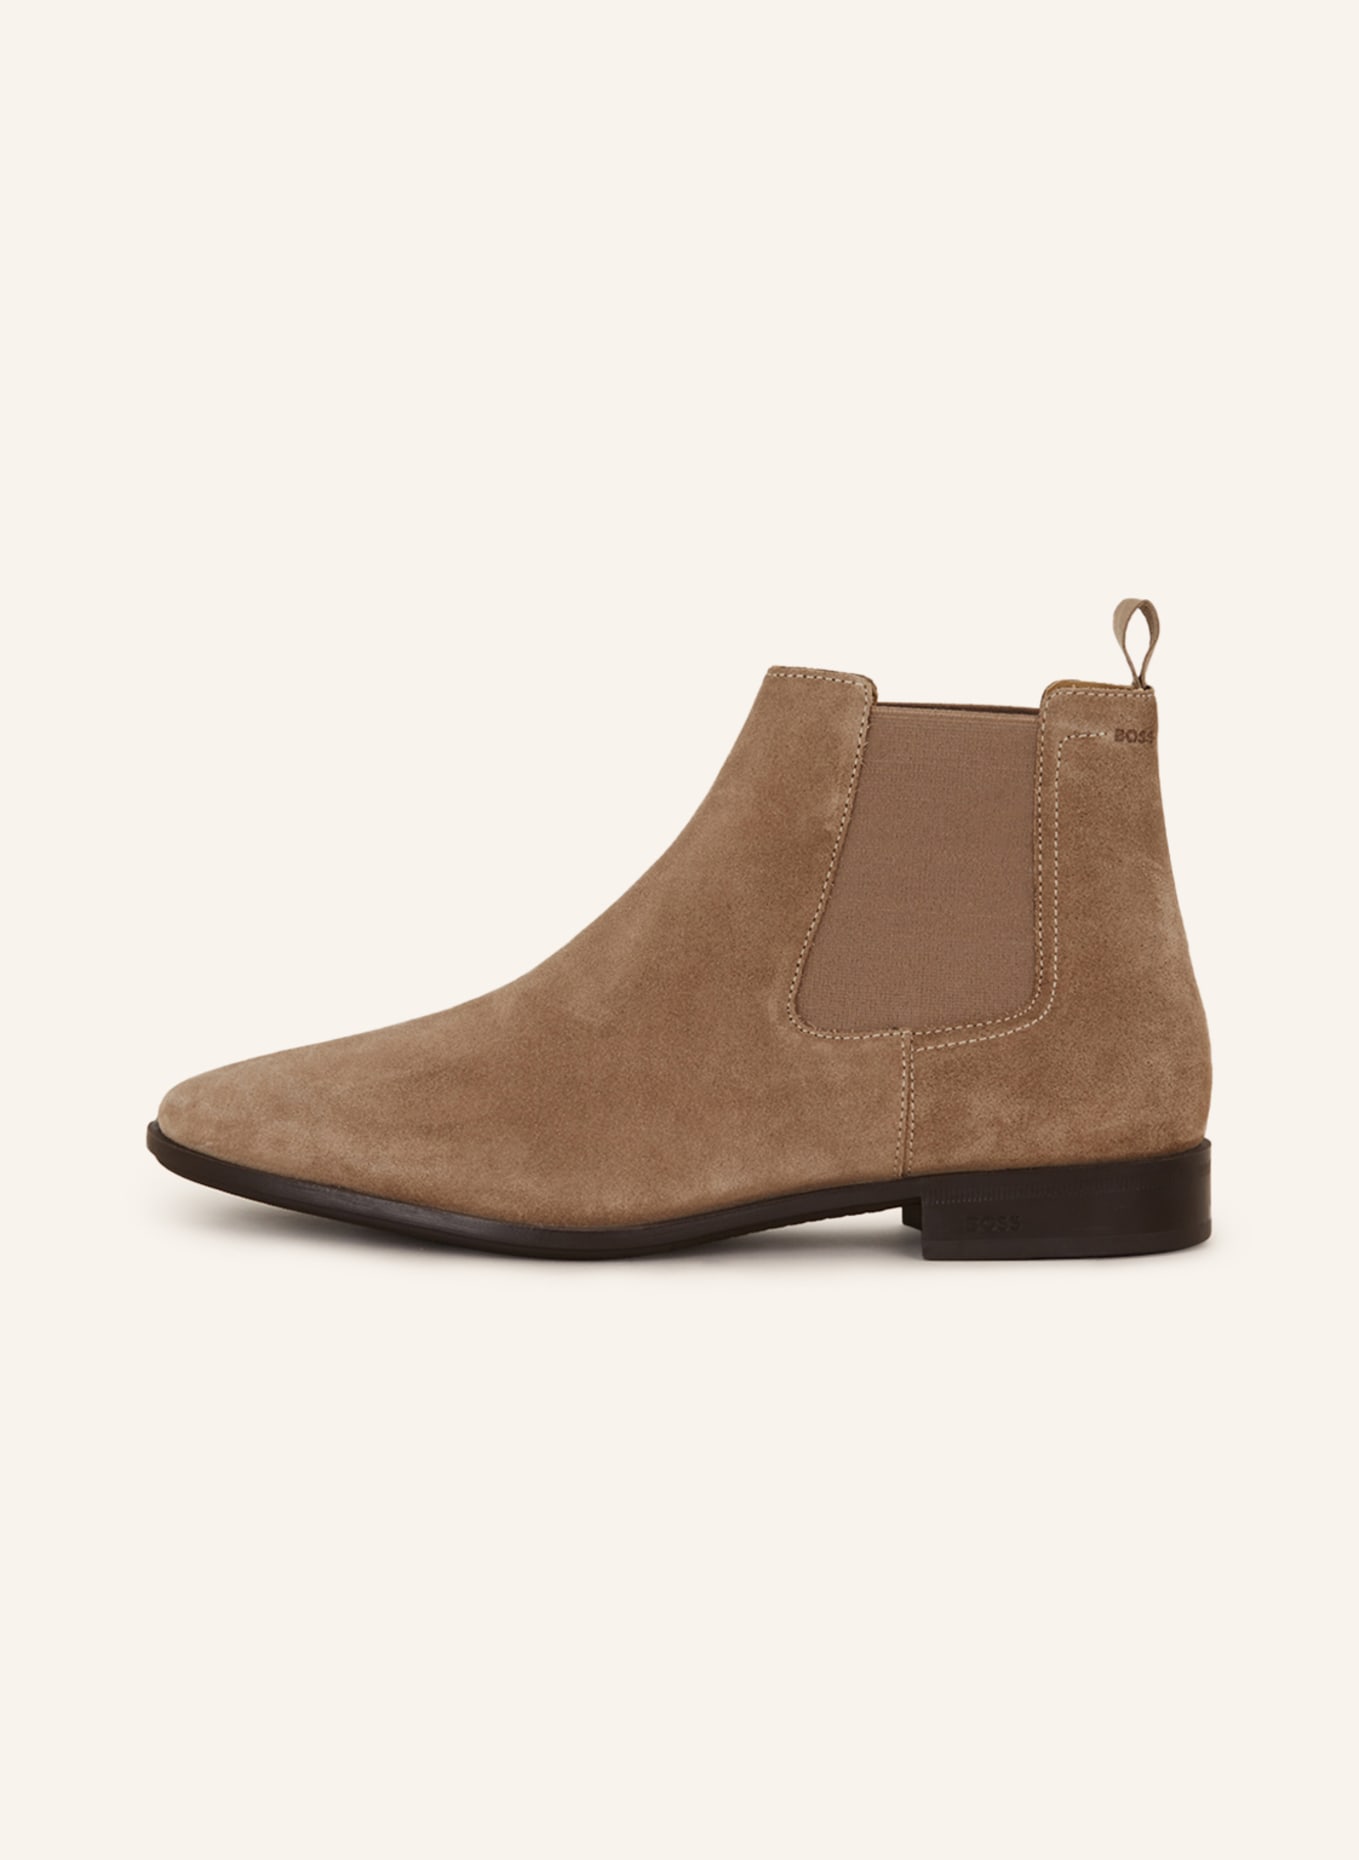 BOSS Chelsea-Boots COLBY, Farbe: BEIGE (Bild 4)